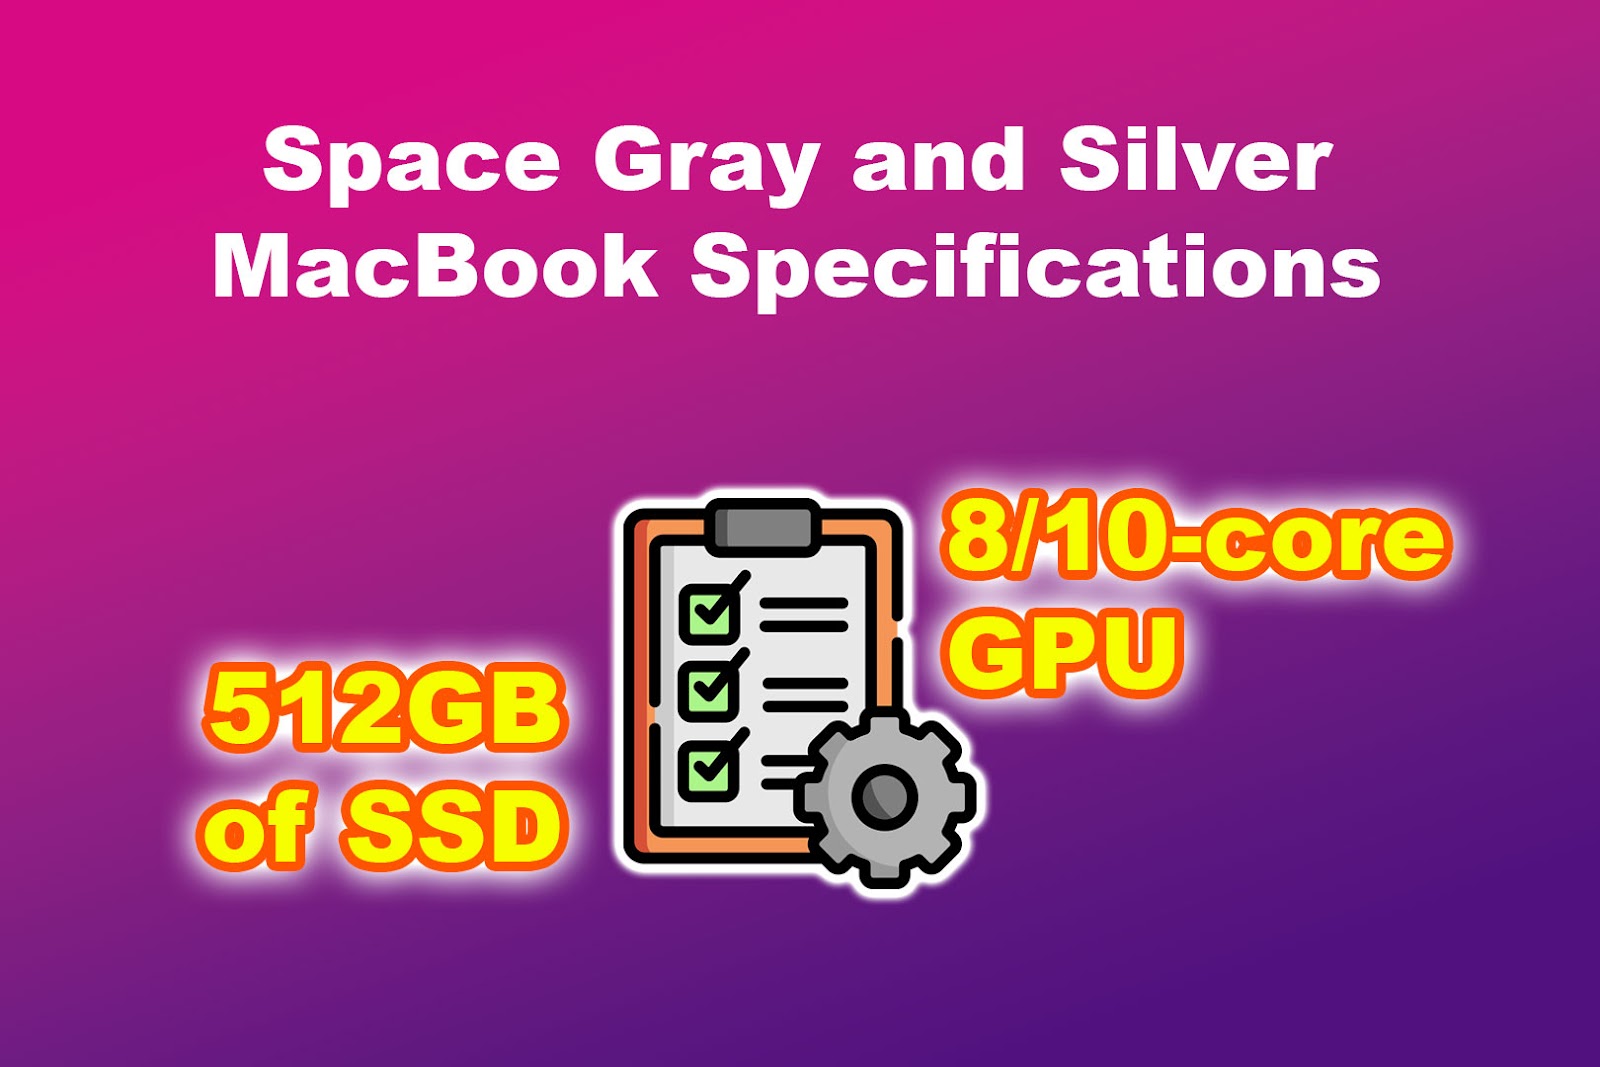 Space Gray and Silver MacBook Specifications